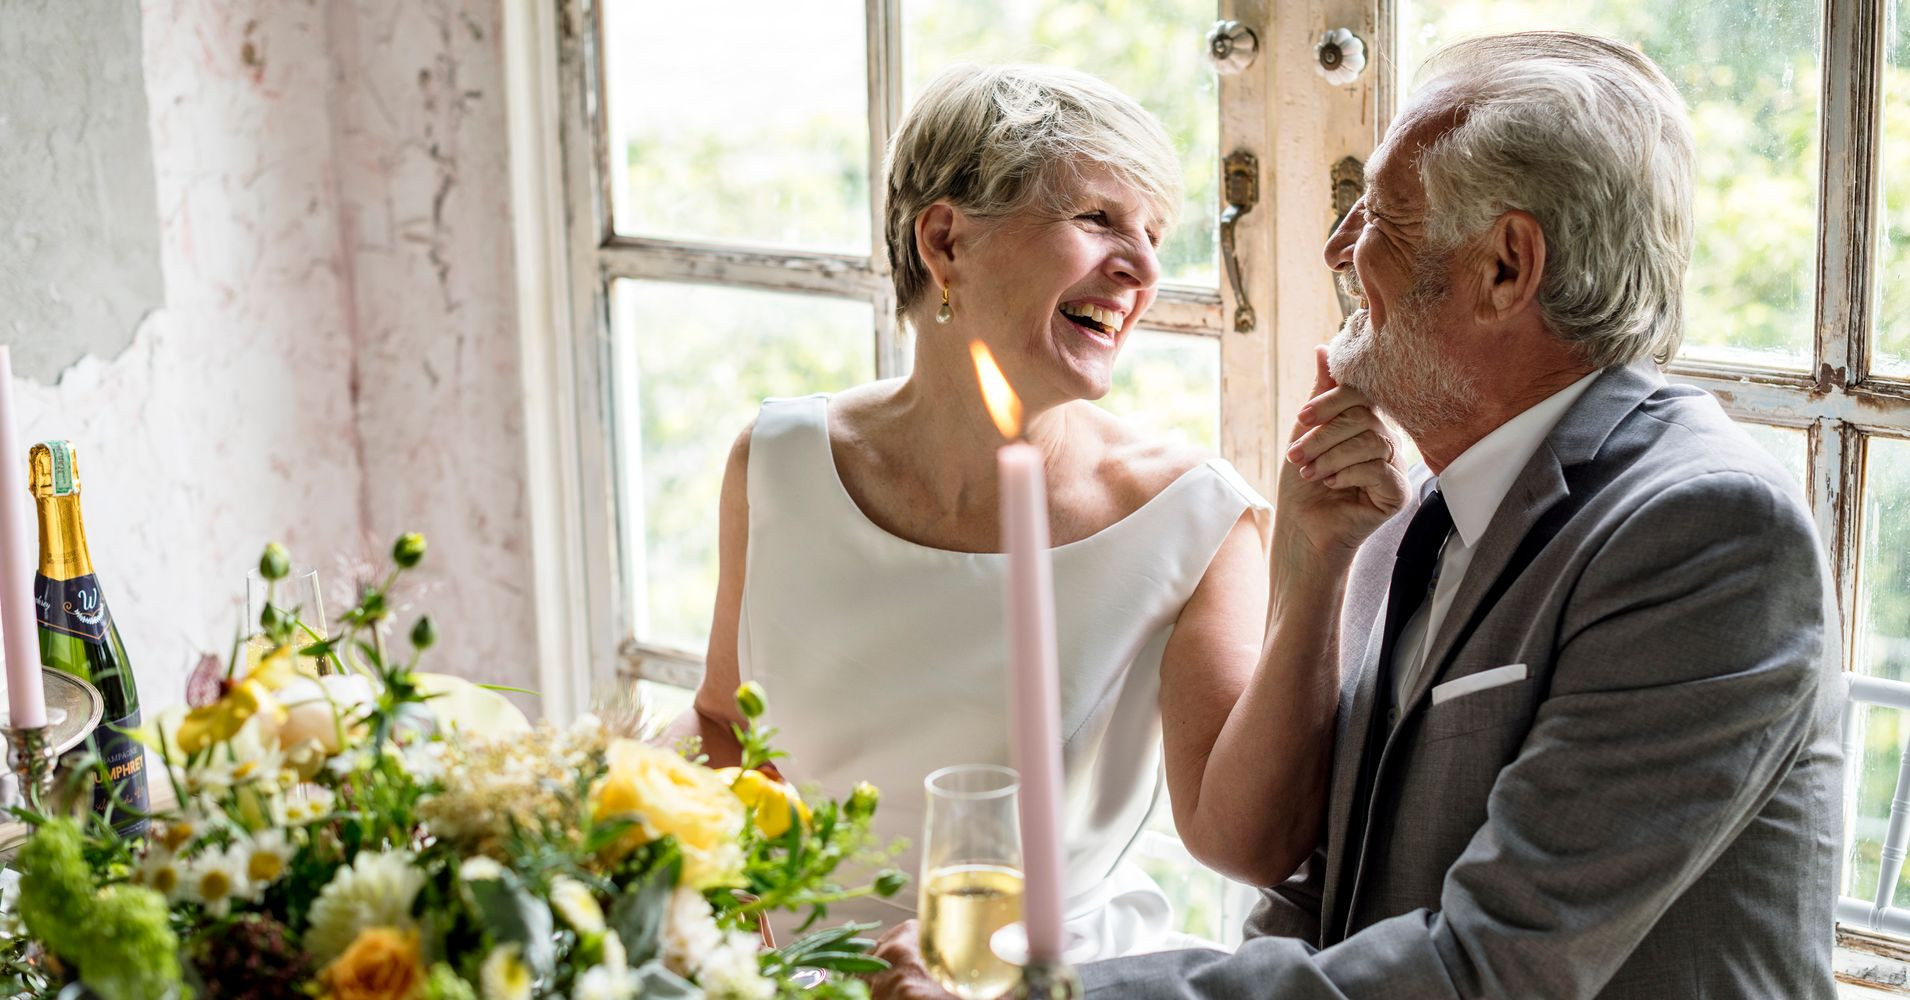 Christmas Gift Ideas For Older Couple
 27 Wedding Gifts For Older Couples Marrying The Second